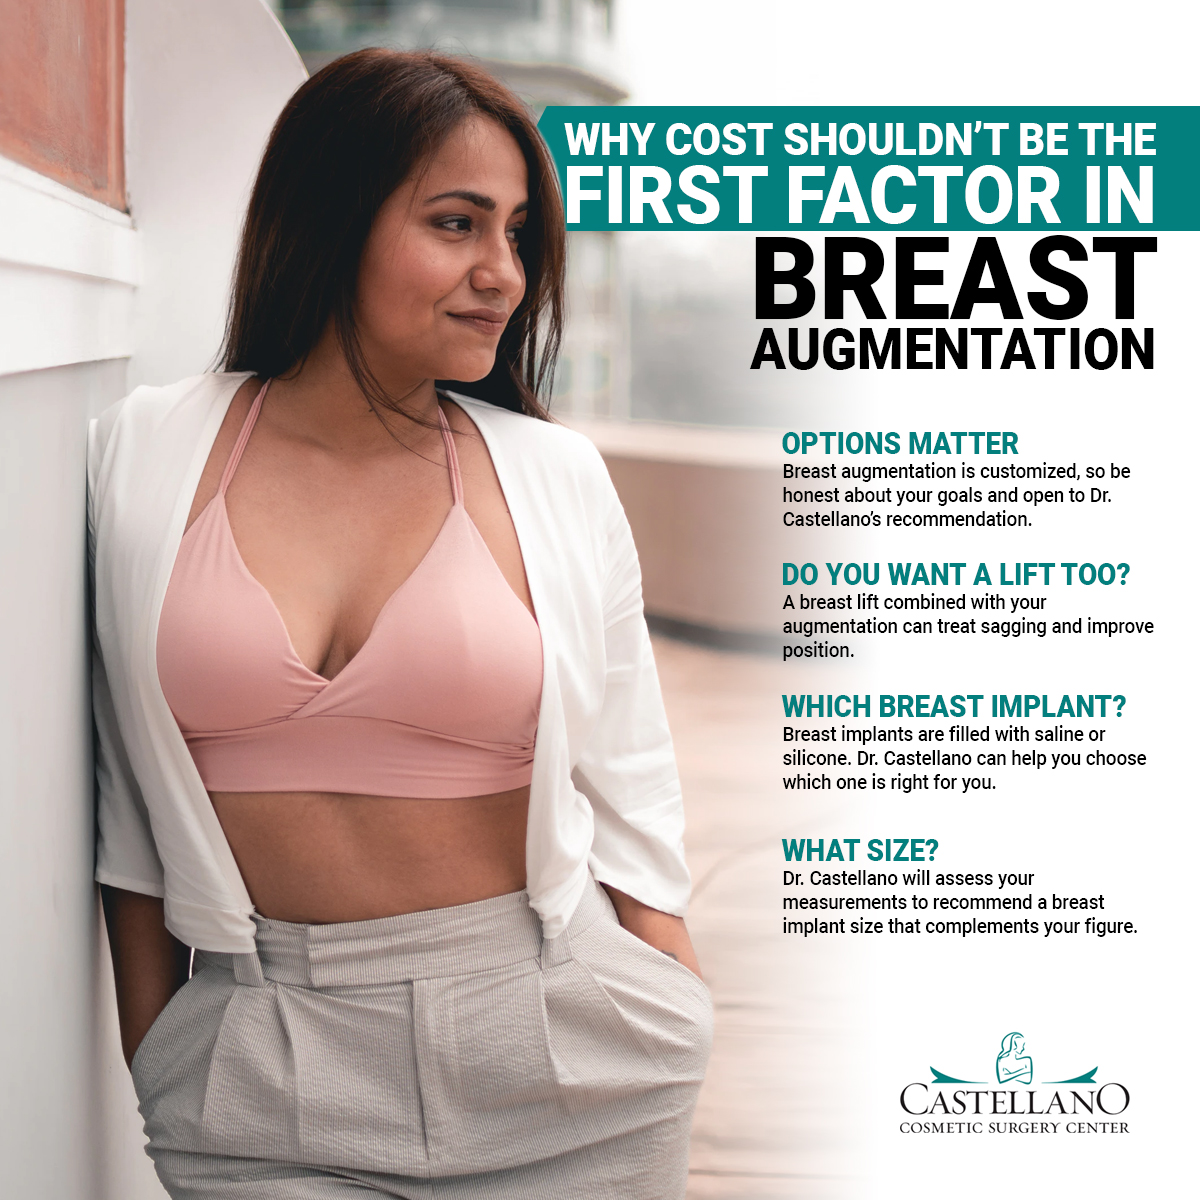 Why Cost Shouldn't Be The First Factor In Breast Augmentation [Infographic] img 1